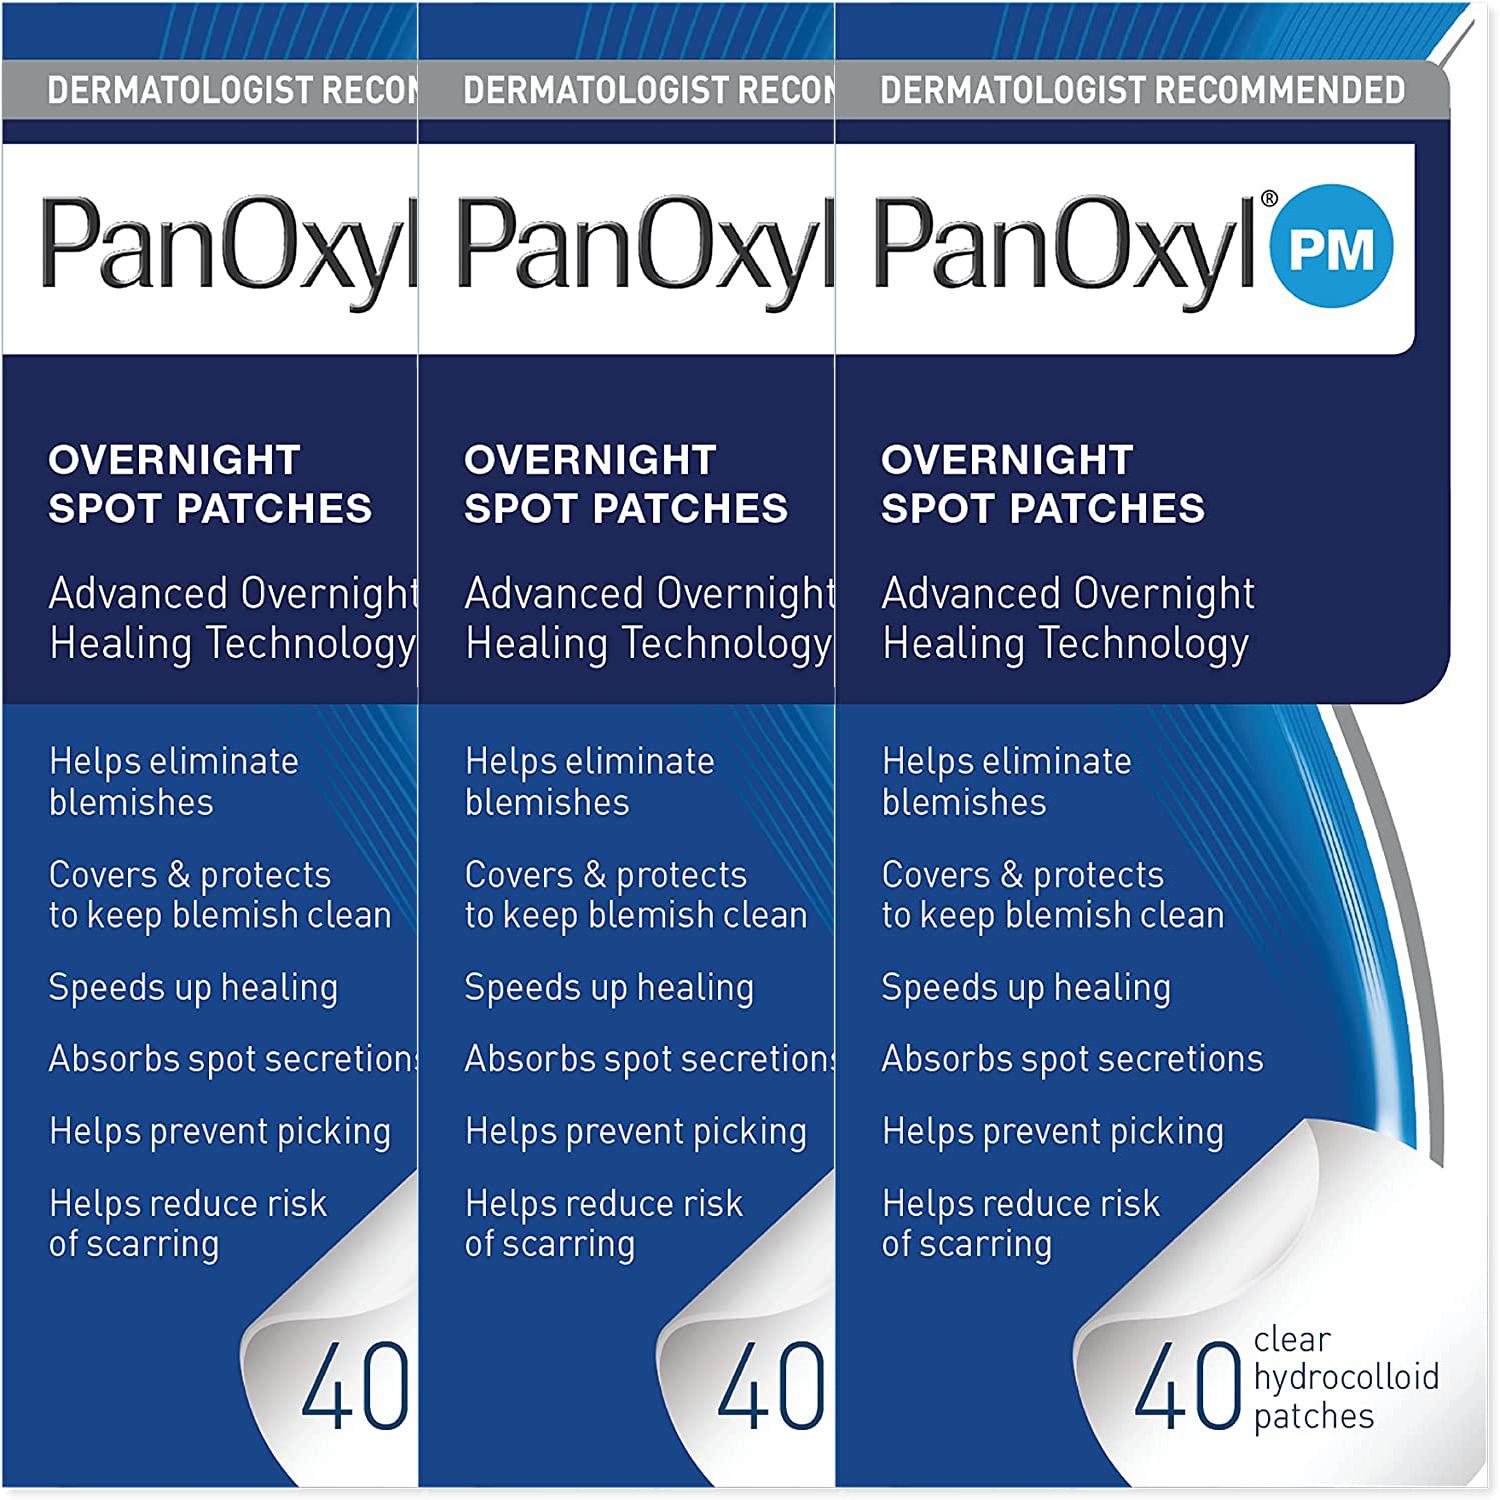 PanOxyl PM Overnight Spot Patches 120 Count for $15.71 Shipped